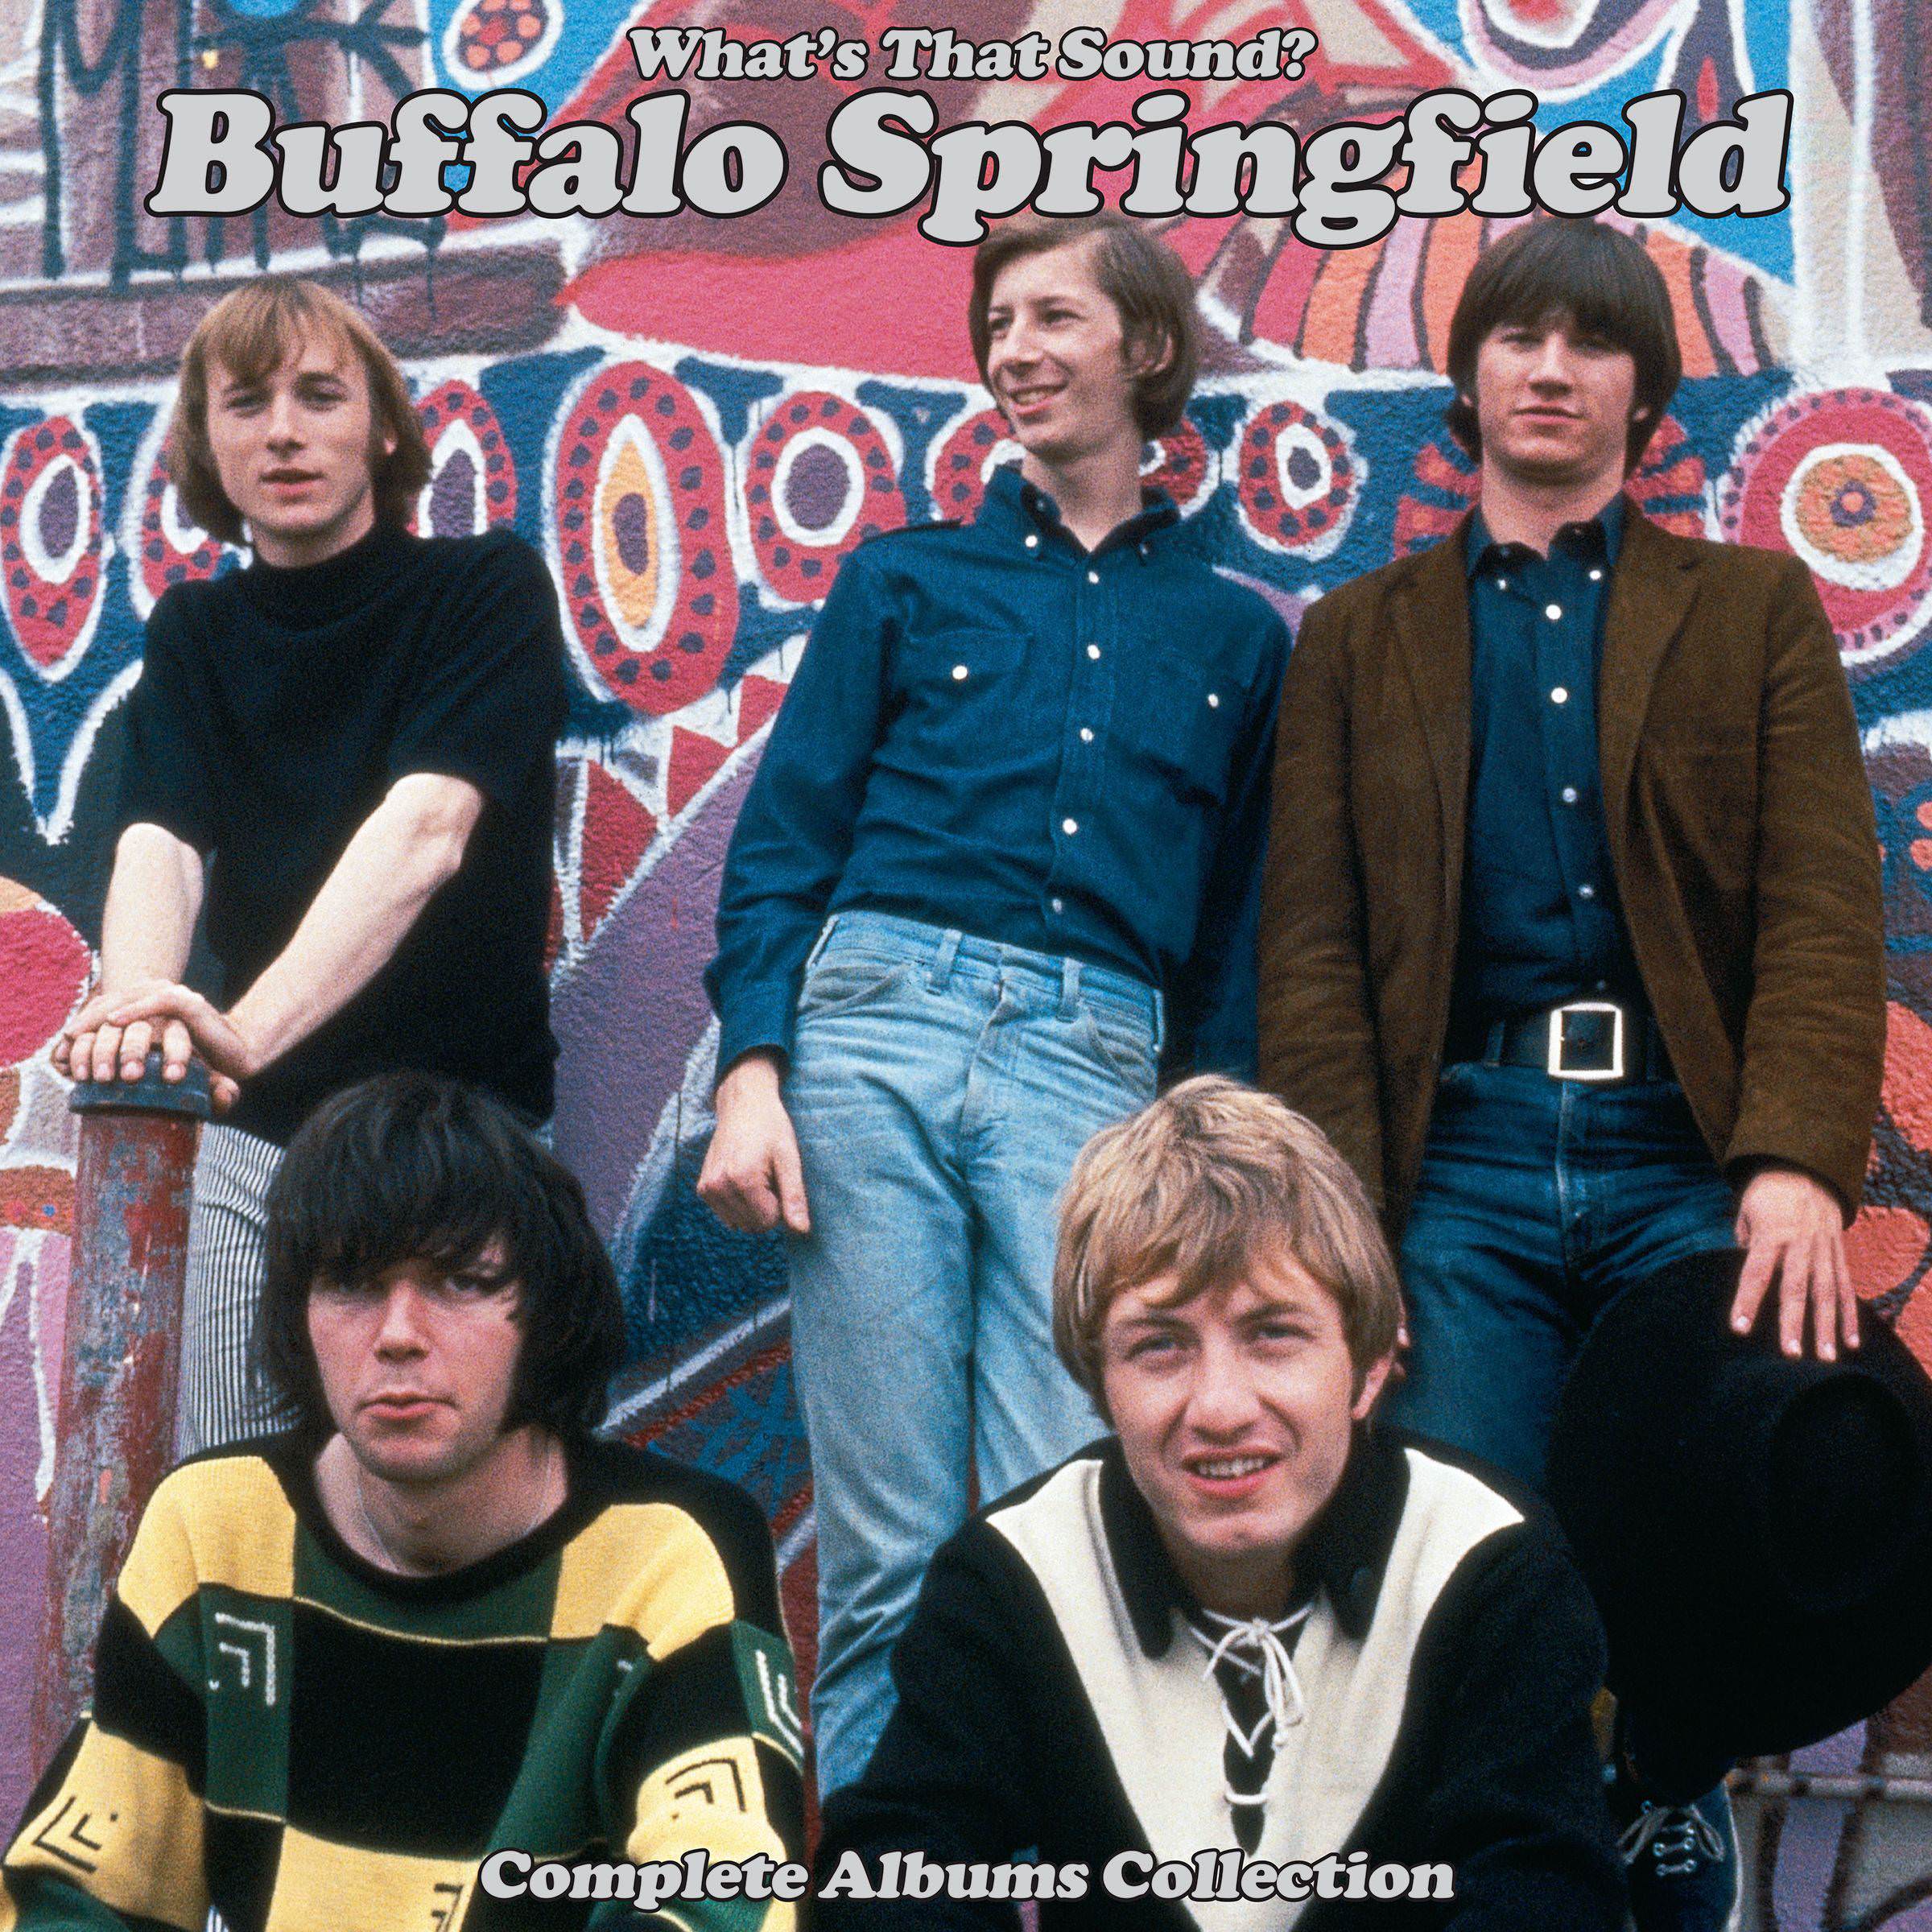 Buffalo Springfield - What’s That Sound? Complete Albums Collection (2018) [FLAC 24bit/192kHz]